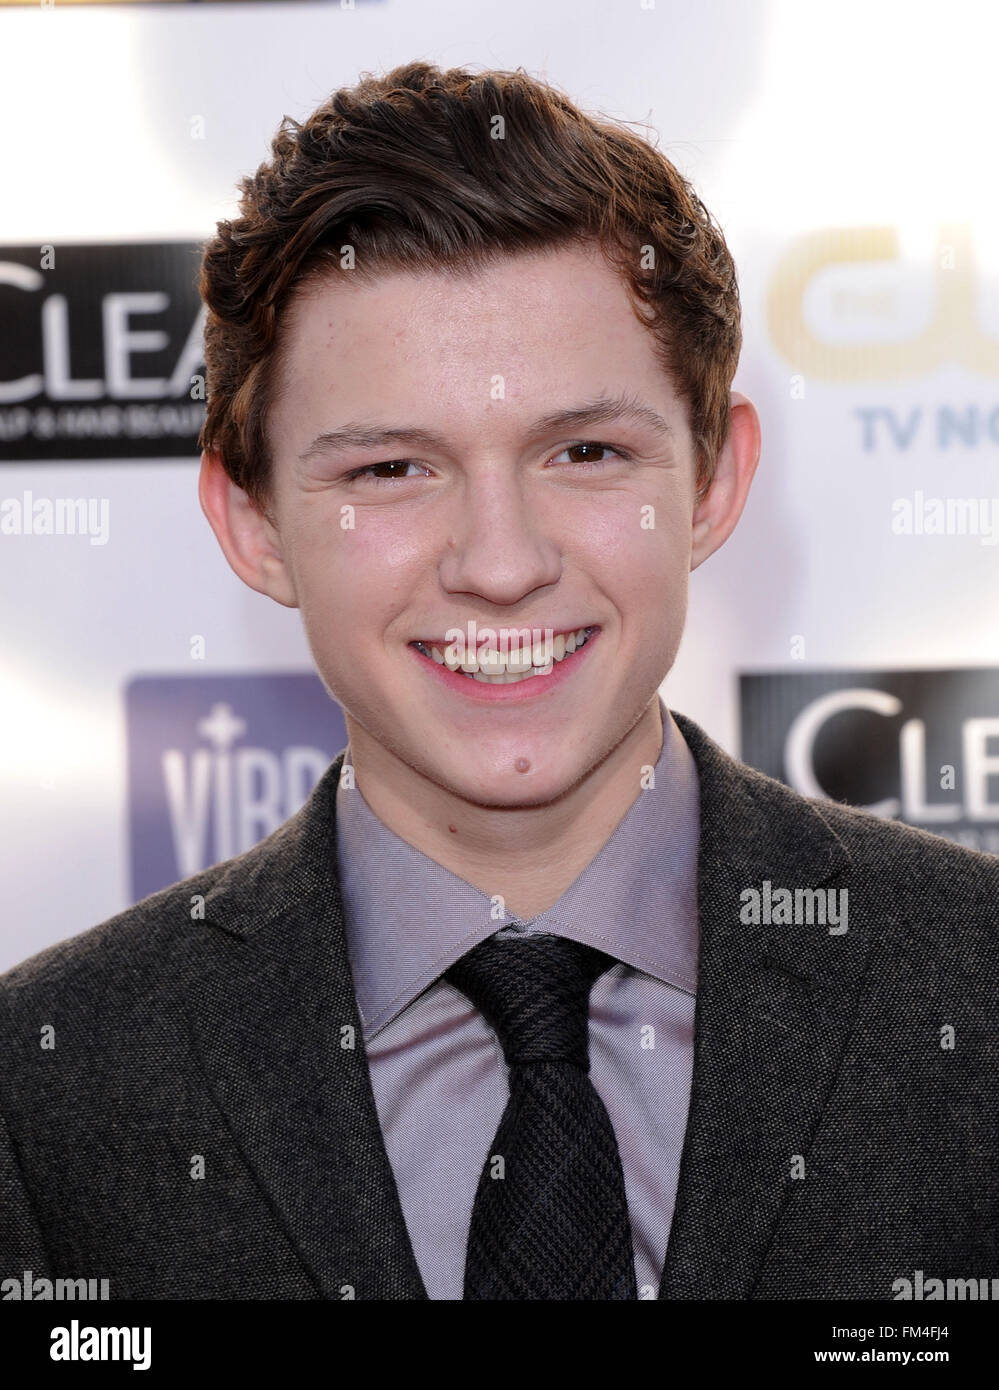 File. 10th Mar, 2016. Marvel and Sony announced that English actor TOM HOLLAND will play the next Peter Parker in the upcoming untitled 'Spider-Man' franchise. Pictured: Jan. 10, 2013 - Santa Monica, California, U.S. - Tom Holland arrives for the Critic's Choice Awards 2013 at Barker Hanger. © Lisa O'Connor/ZUMAPRESS.com/Alamy Live News Stock Photo